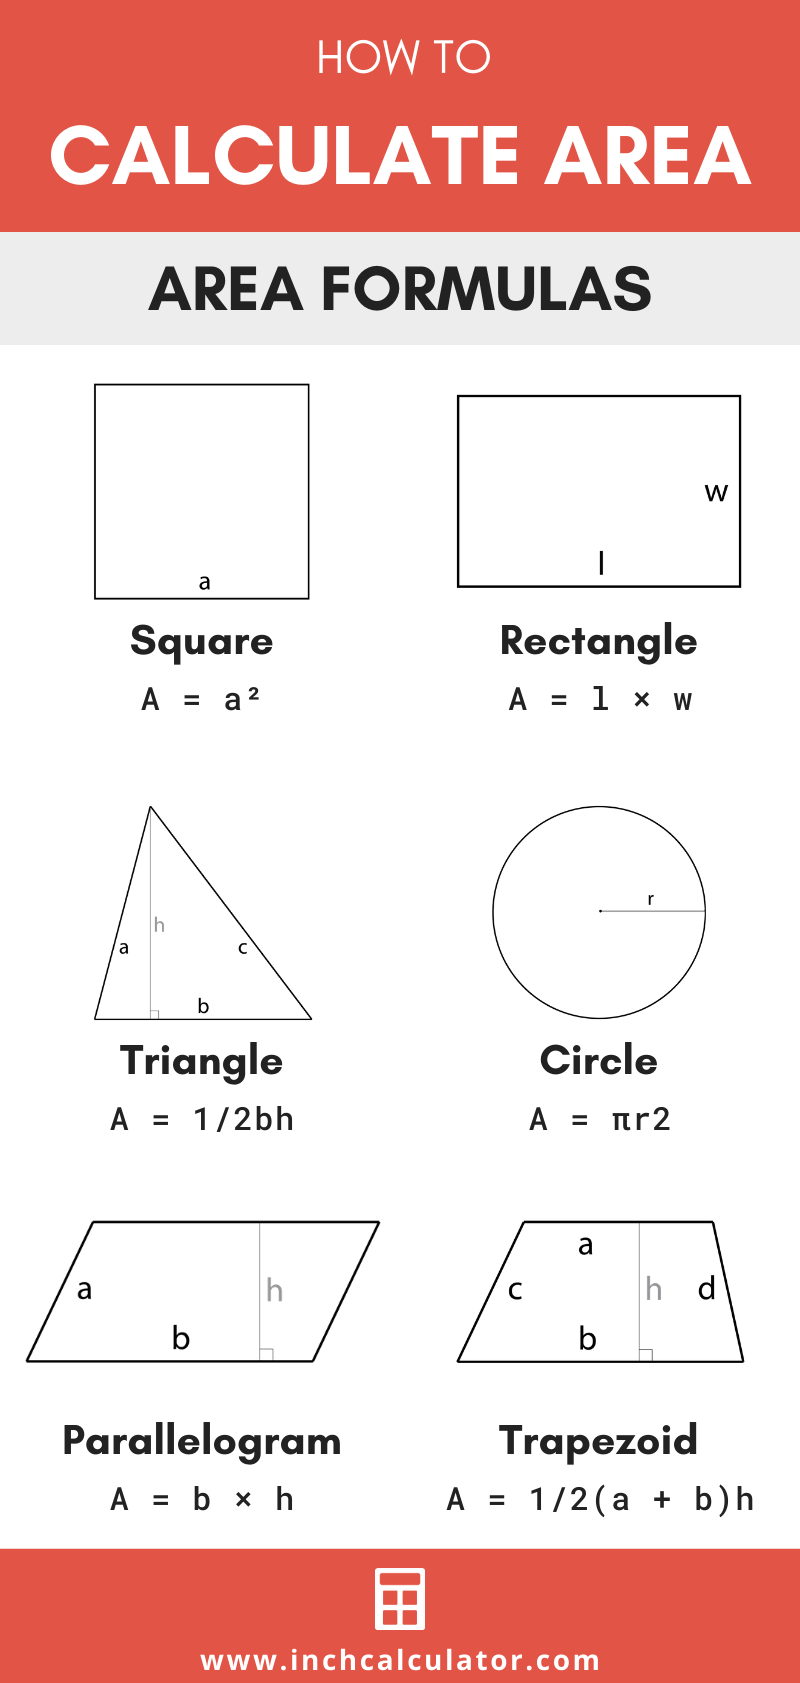 Share area calculator – calculate area of various shapes